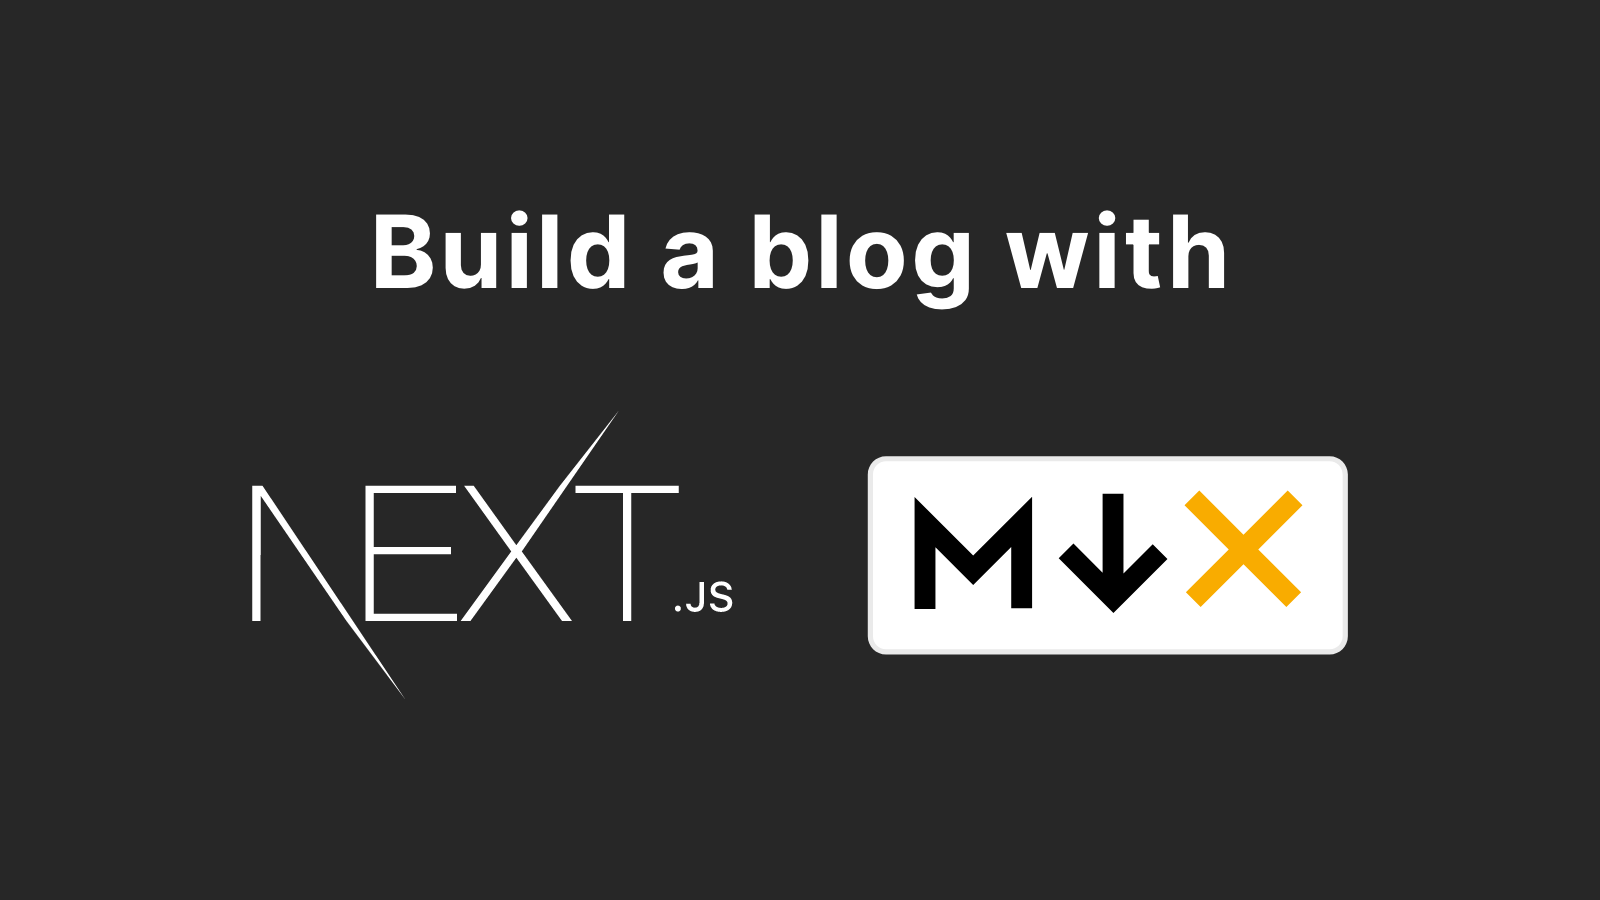 Introducing my MDX blog with Next.js and how it works